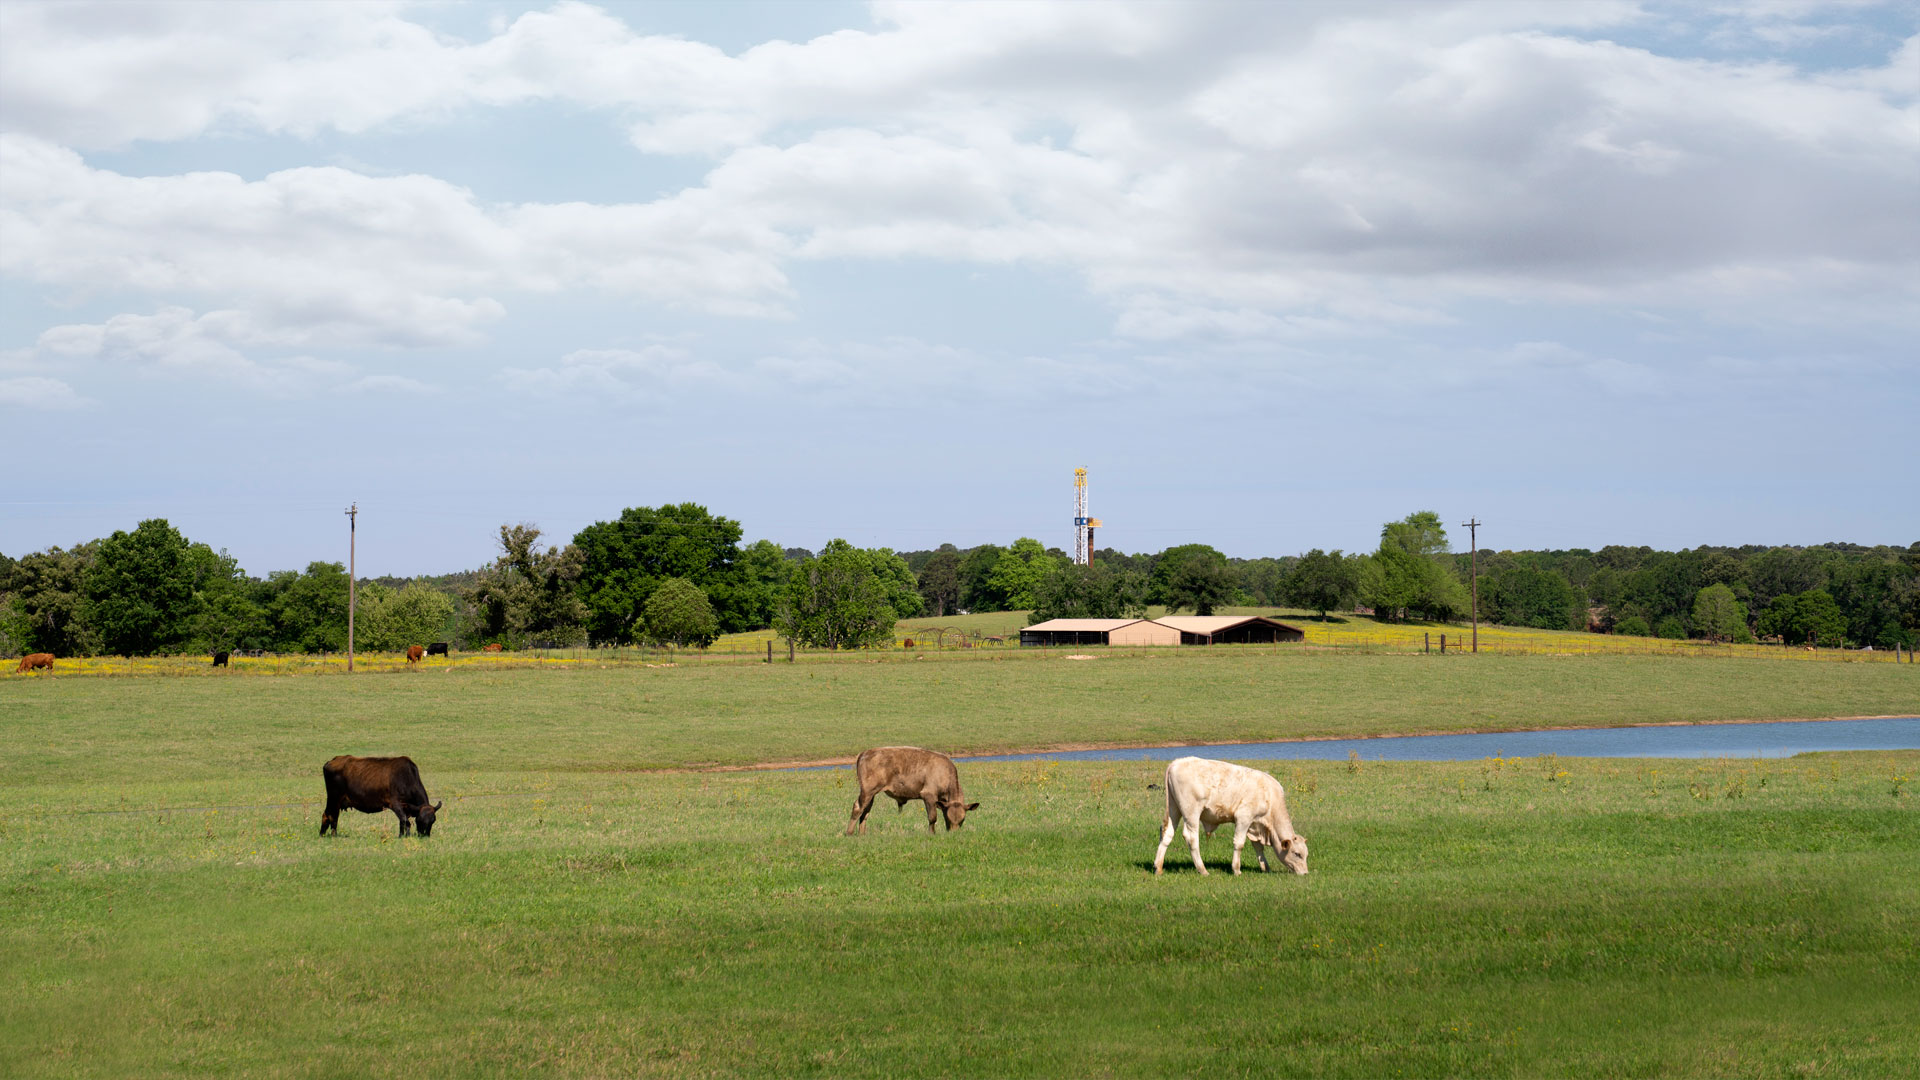 Ark-La-Tex — drilling rig in the background, green fields with cows in the foreground